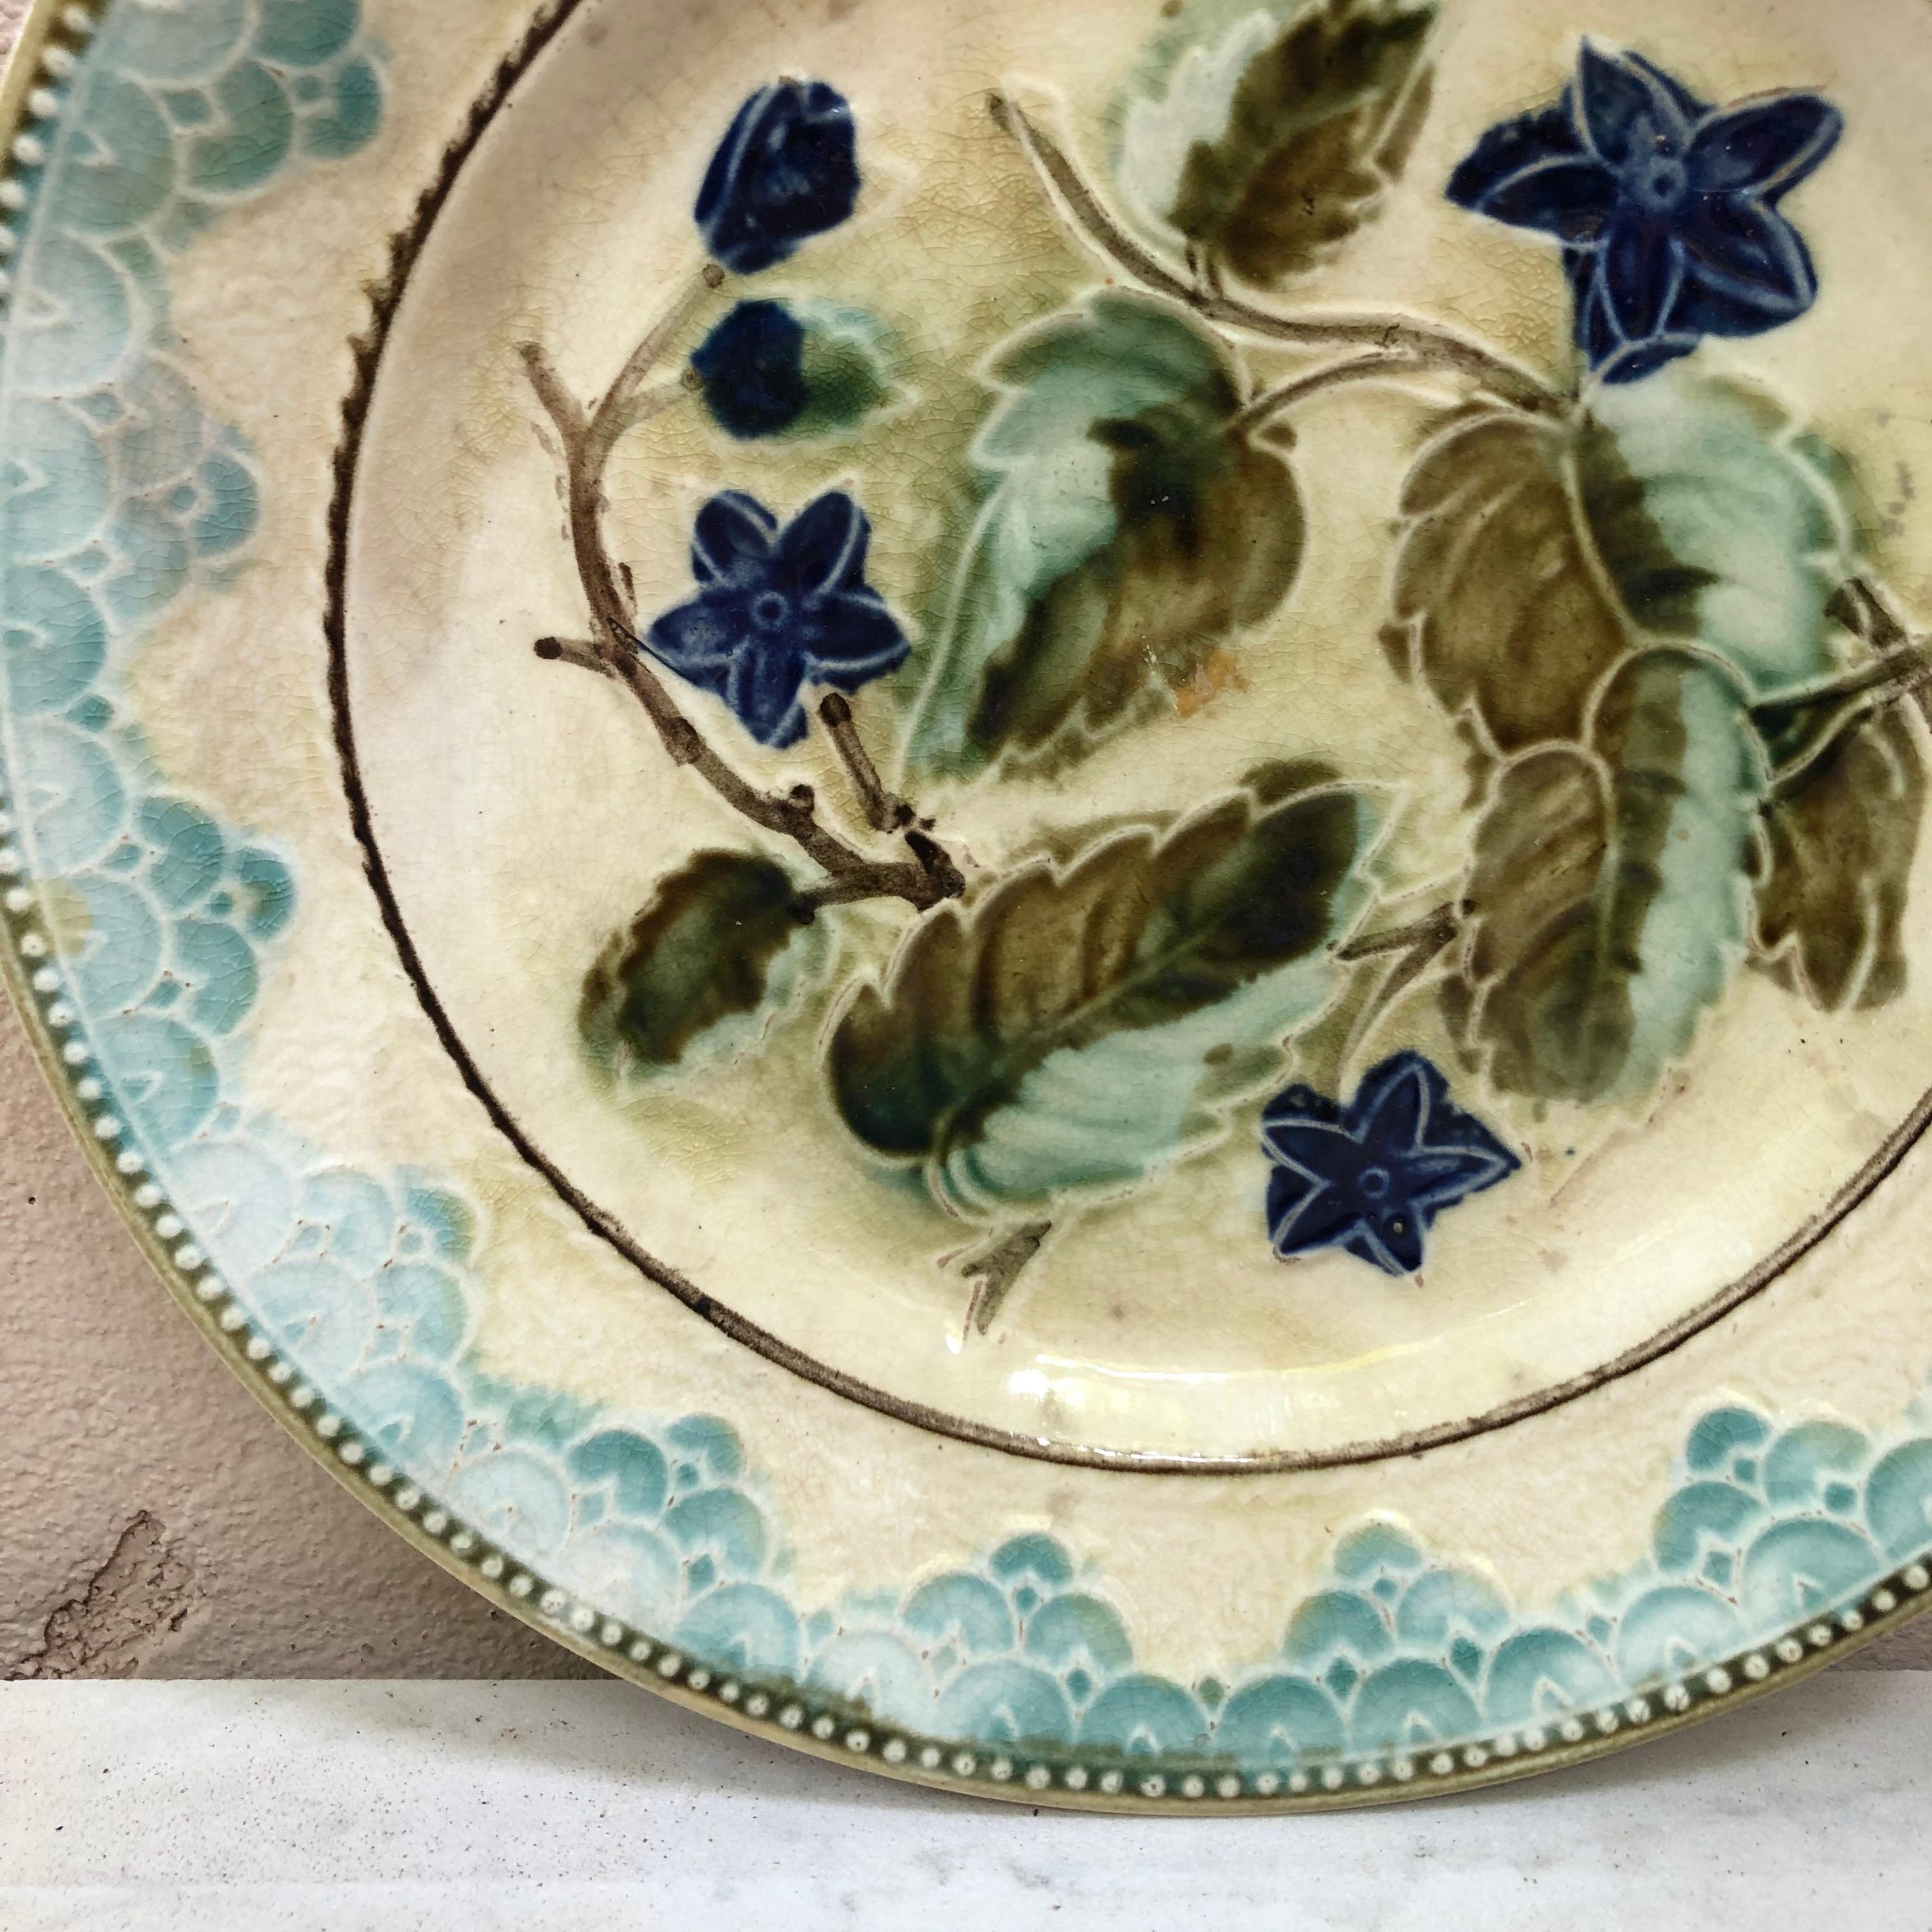 Country Antique Majolica Leaves and Blue Flowers Plate, circa 1890